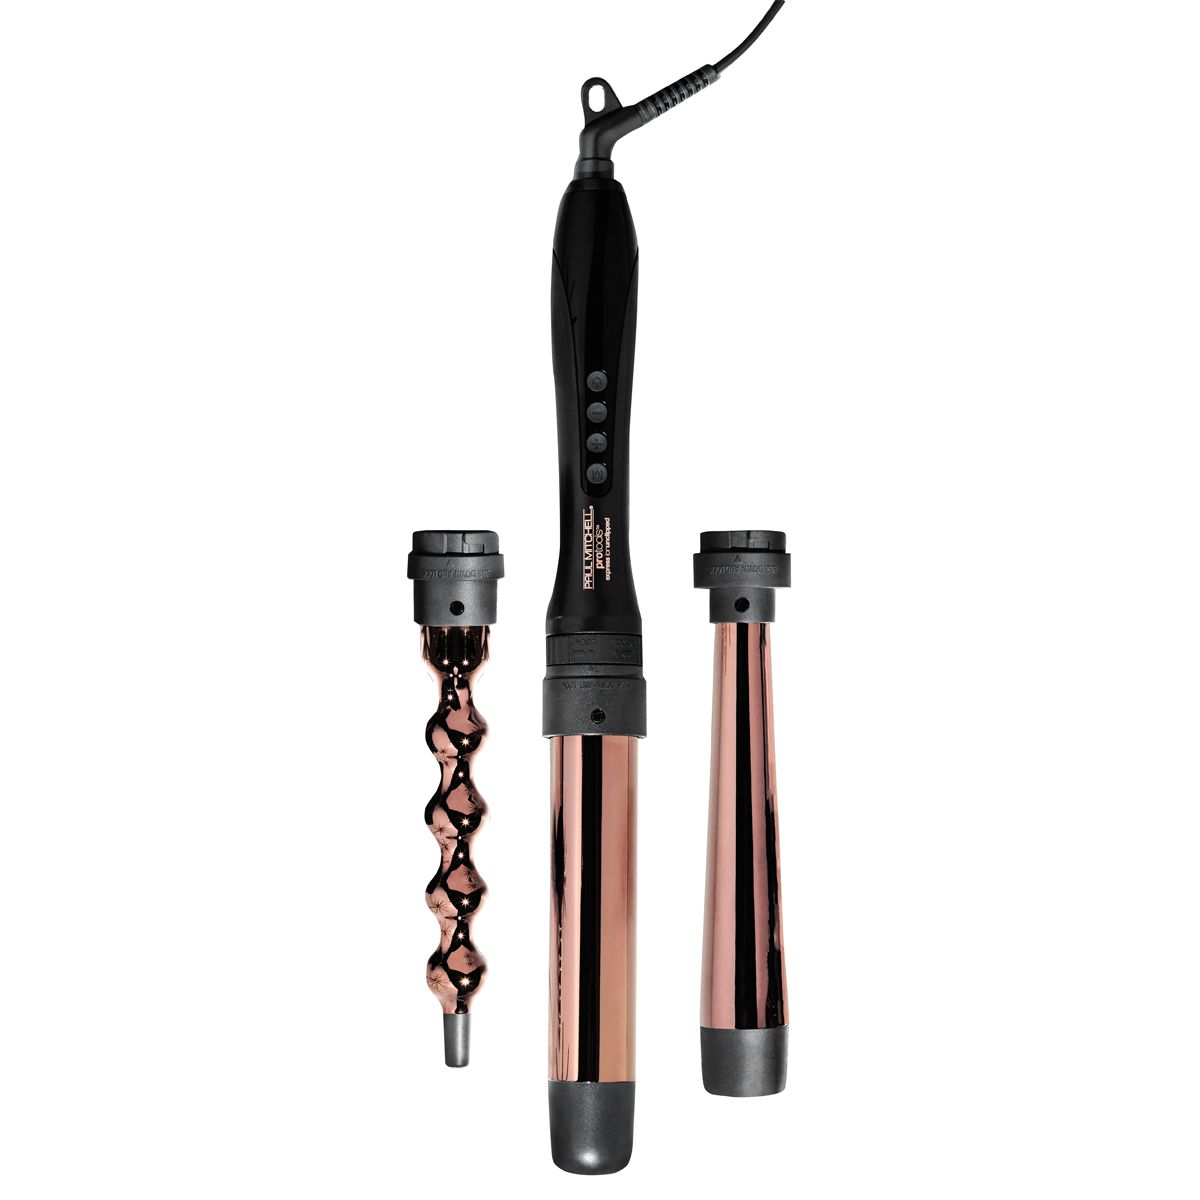 Paul Mitchell Limited Edition Express Ion 3-In-1